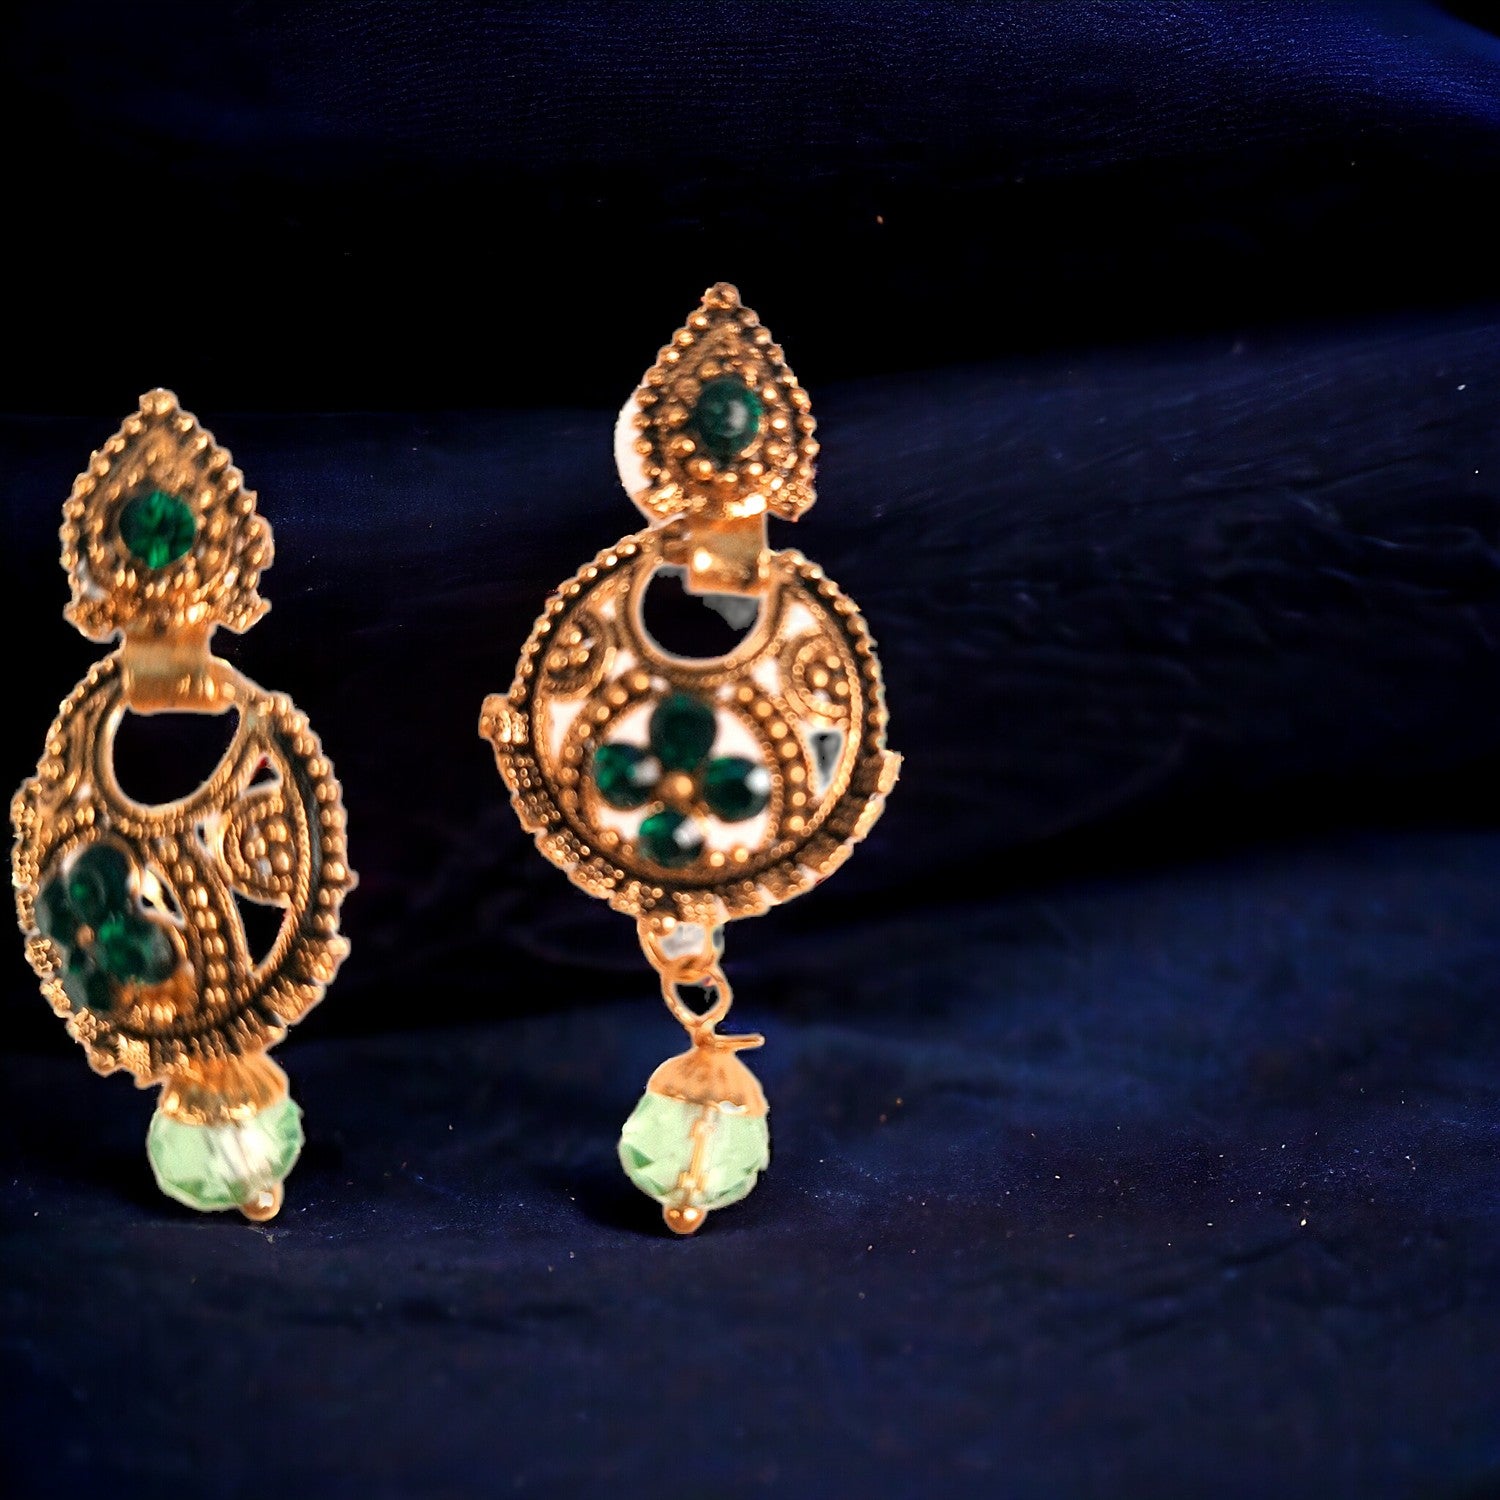 Earrings Jhumka / Danglers - for Girls and Women | Latest Stylish Fashion Jewellery | Gifts for Her, Friendship Day, Valentine's Day Gift - apkamart